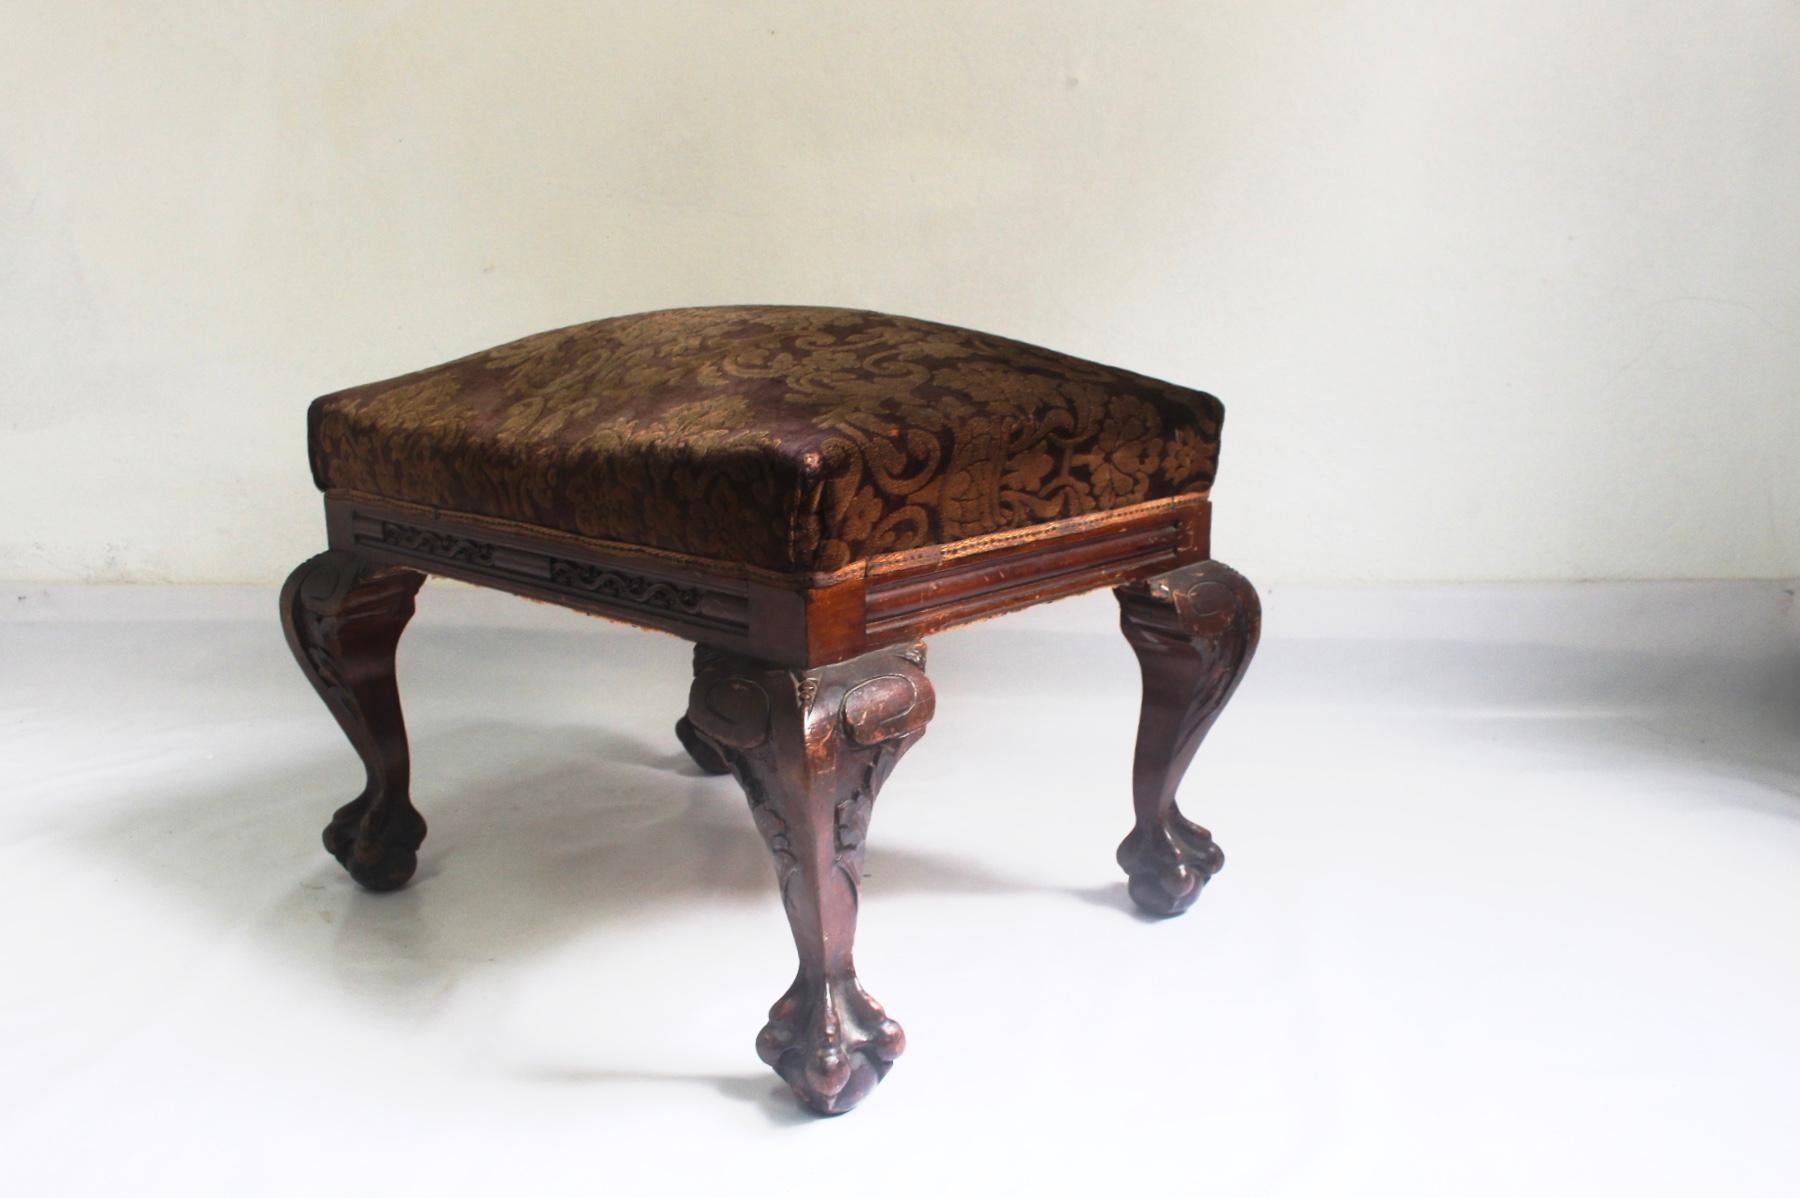 1910s Chippendale Mahogany Ottoman or Stool with Original Velvet Upholstery For Sale 12